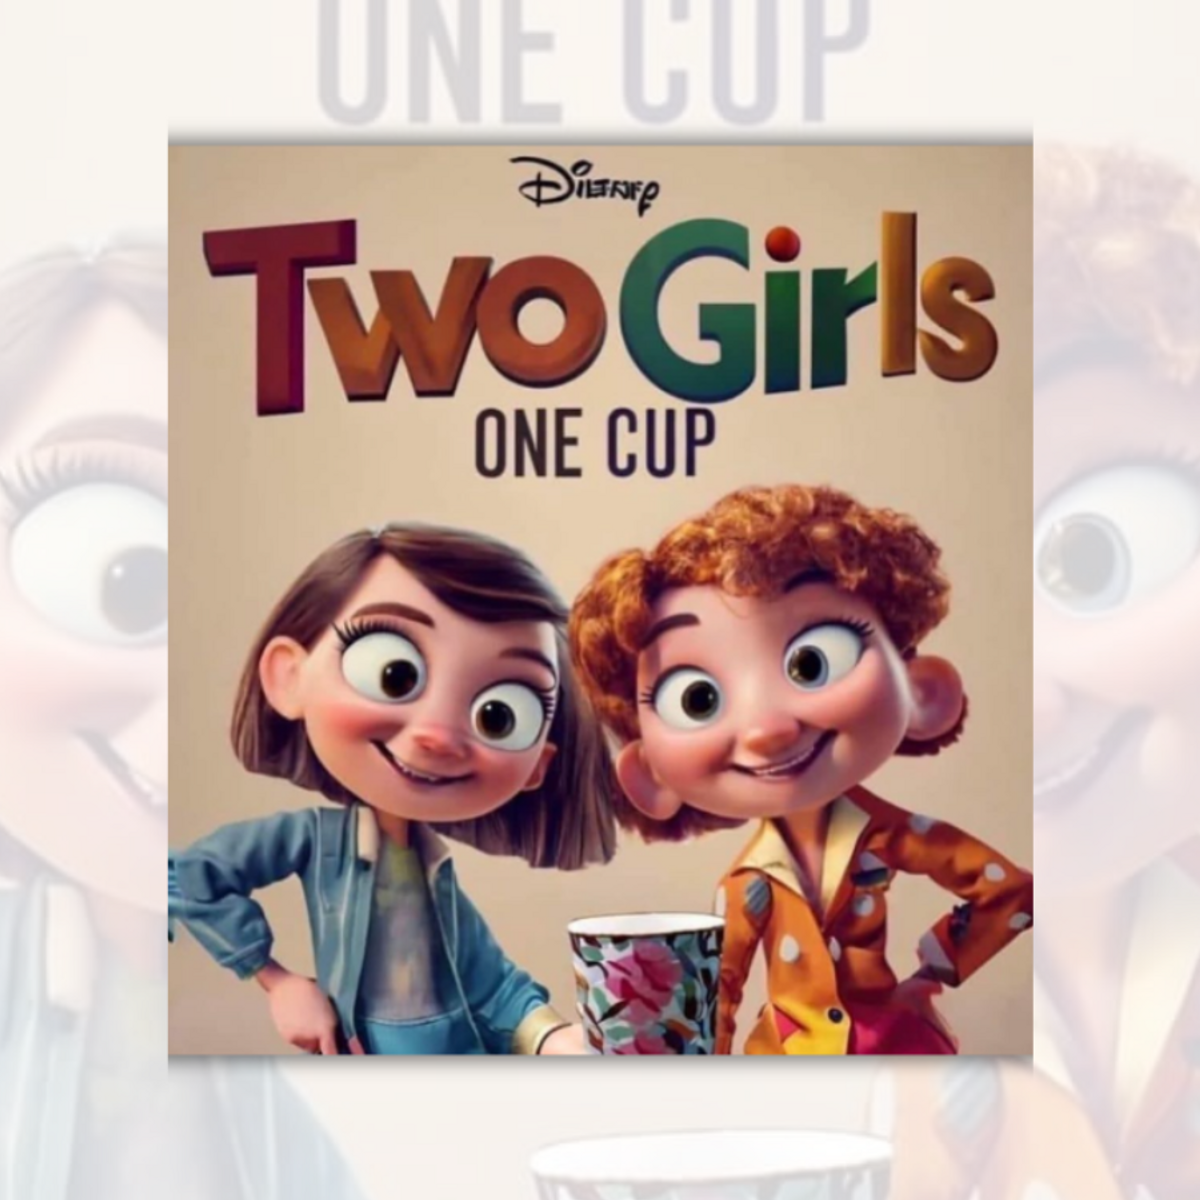 Twogirlonecup